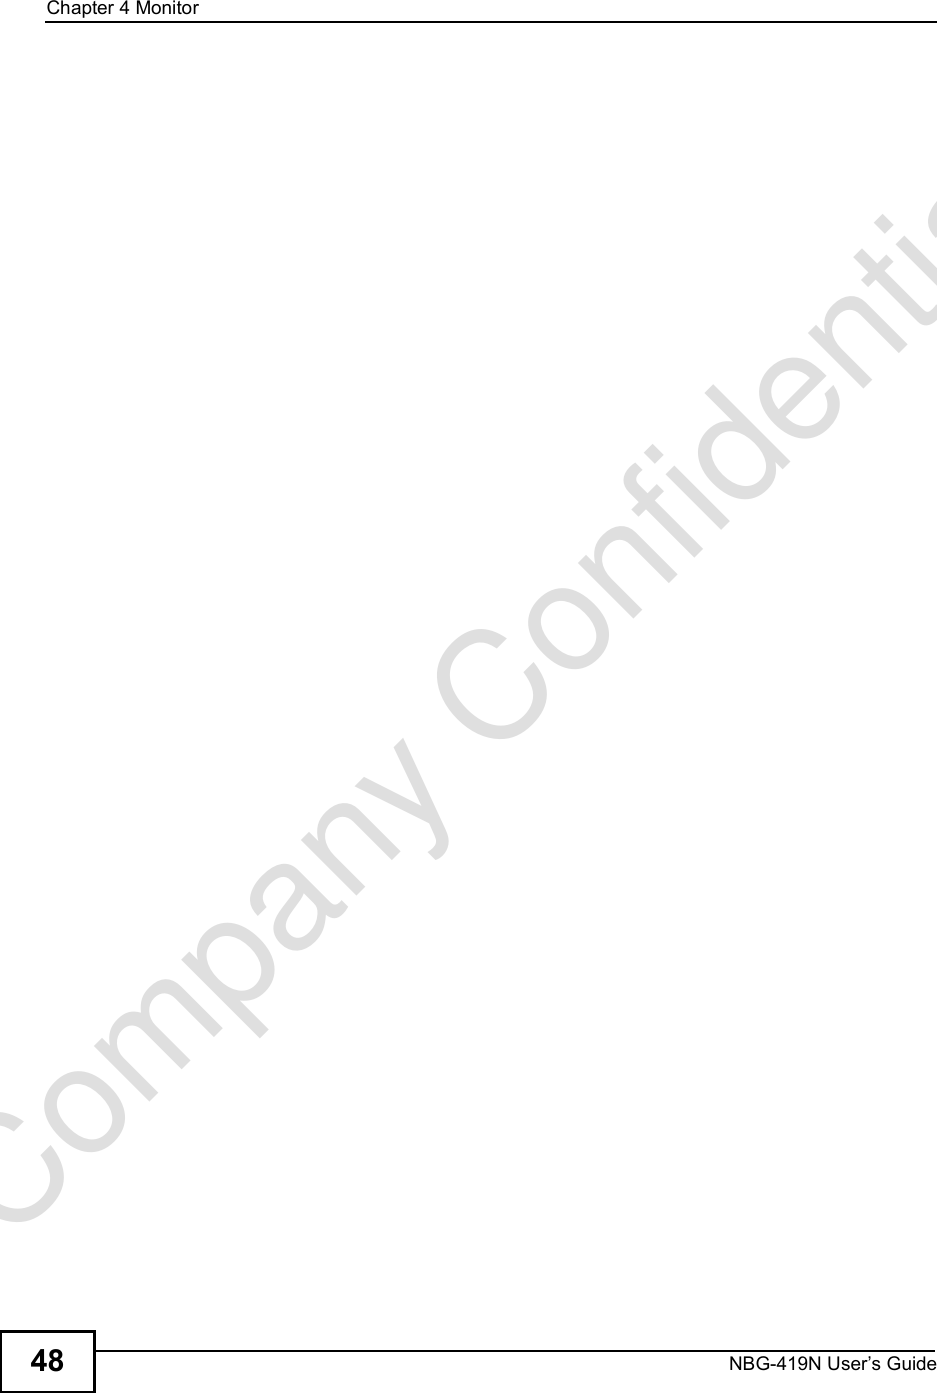 Chapter 4MonitorNBG-419N User s Guide48Company Confidential